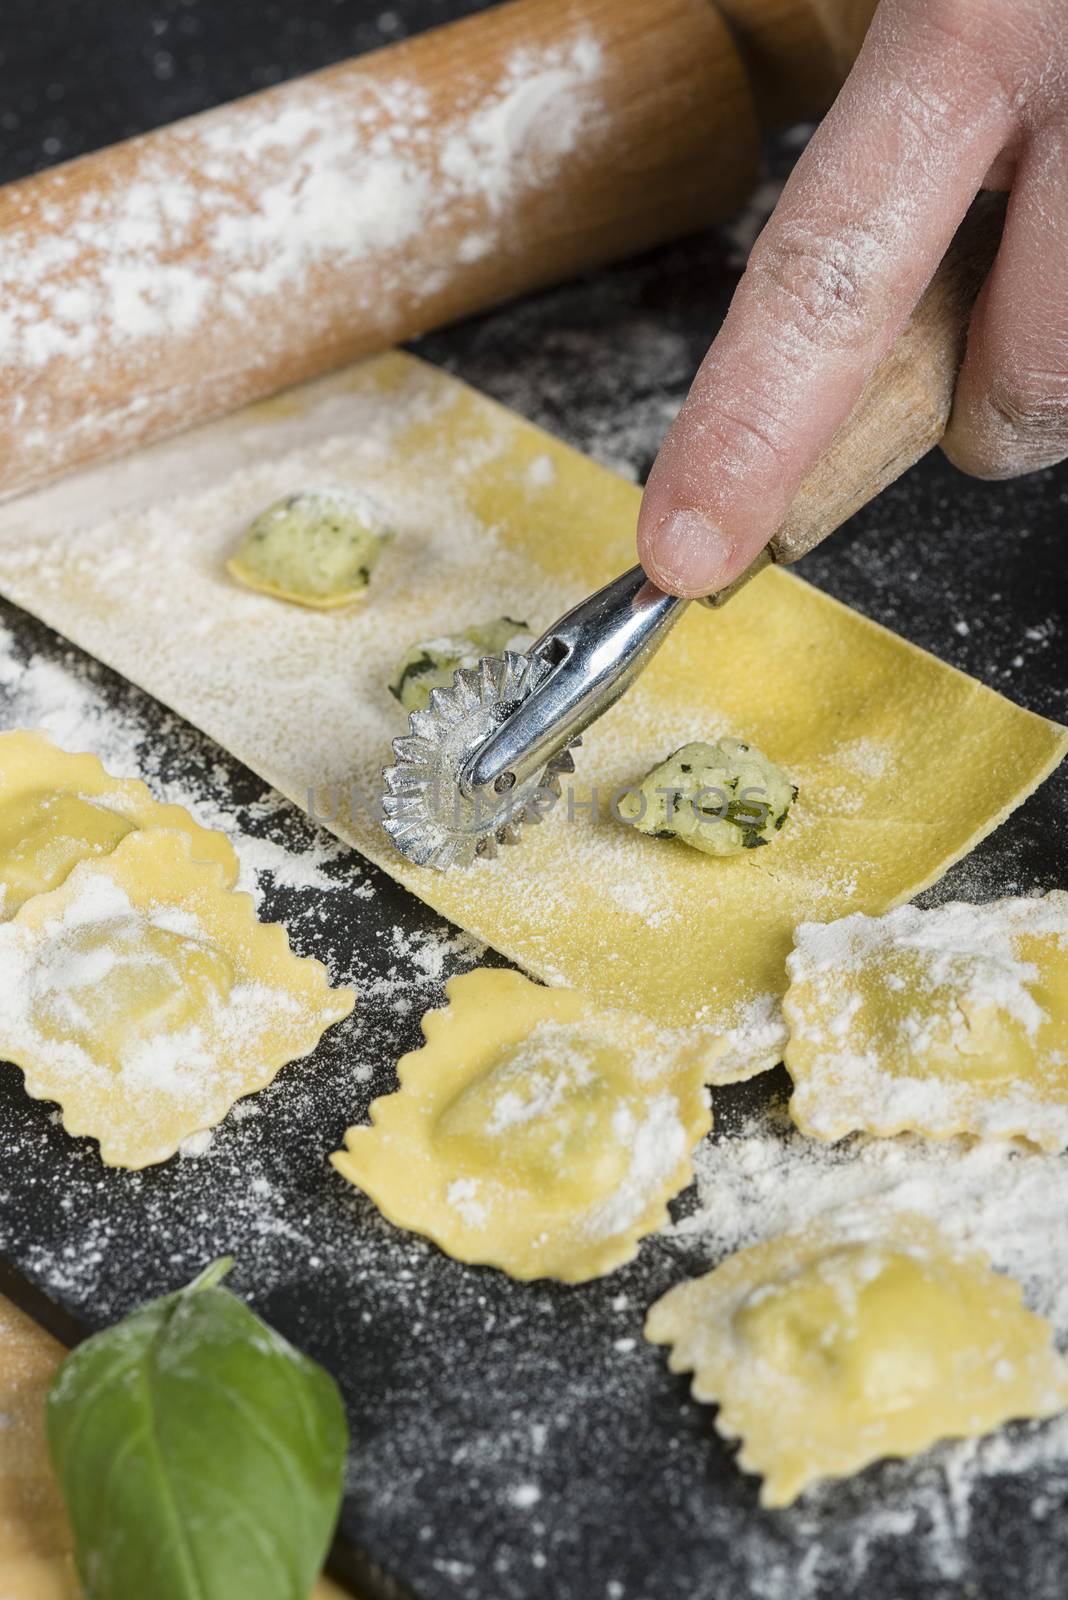 Preparing ravioli in the kitchen with tools and ingredients : dough, flour, eggs, stuffing, cutter, roller, board.